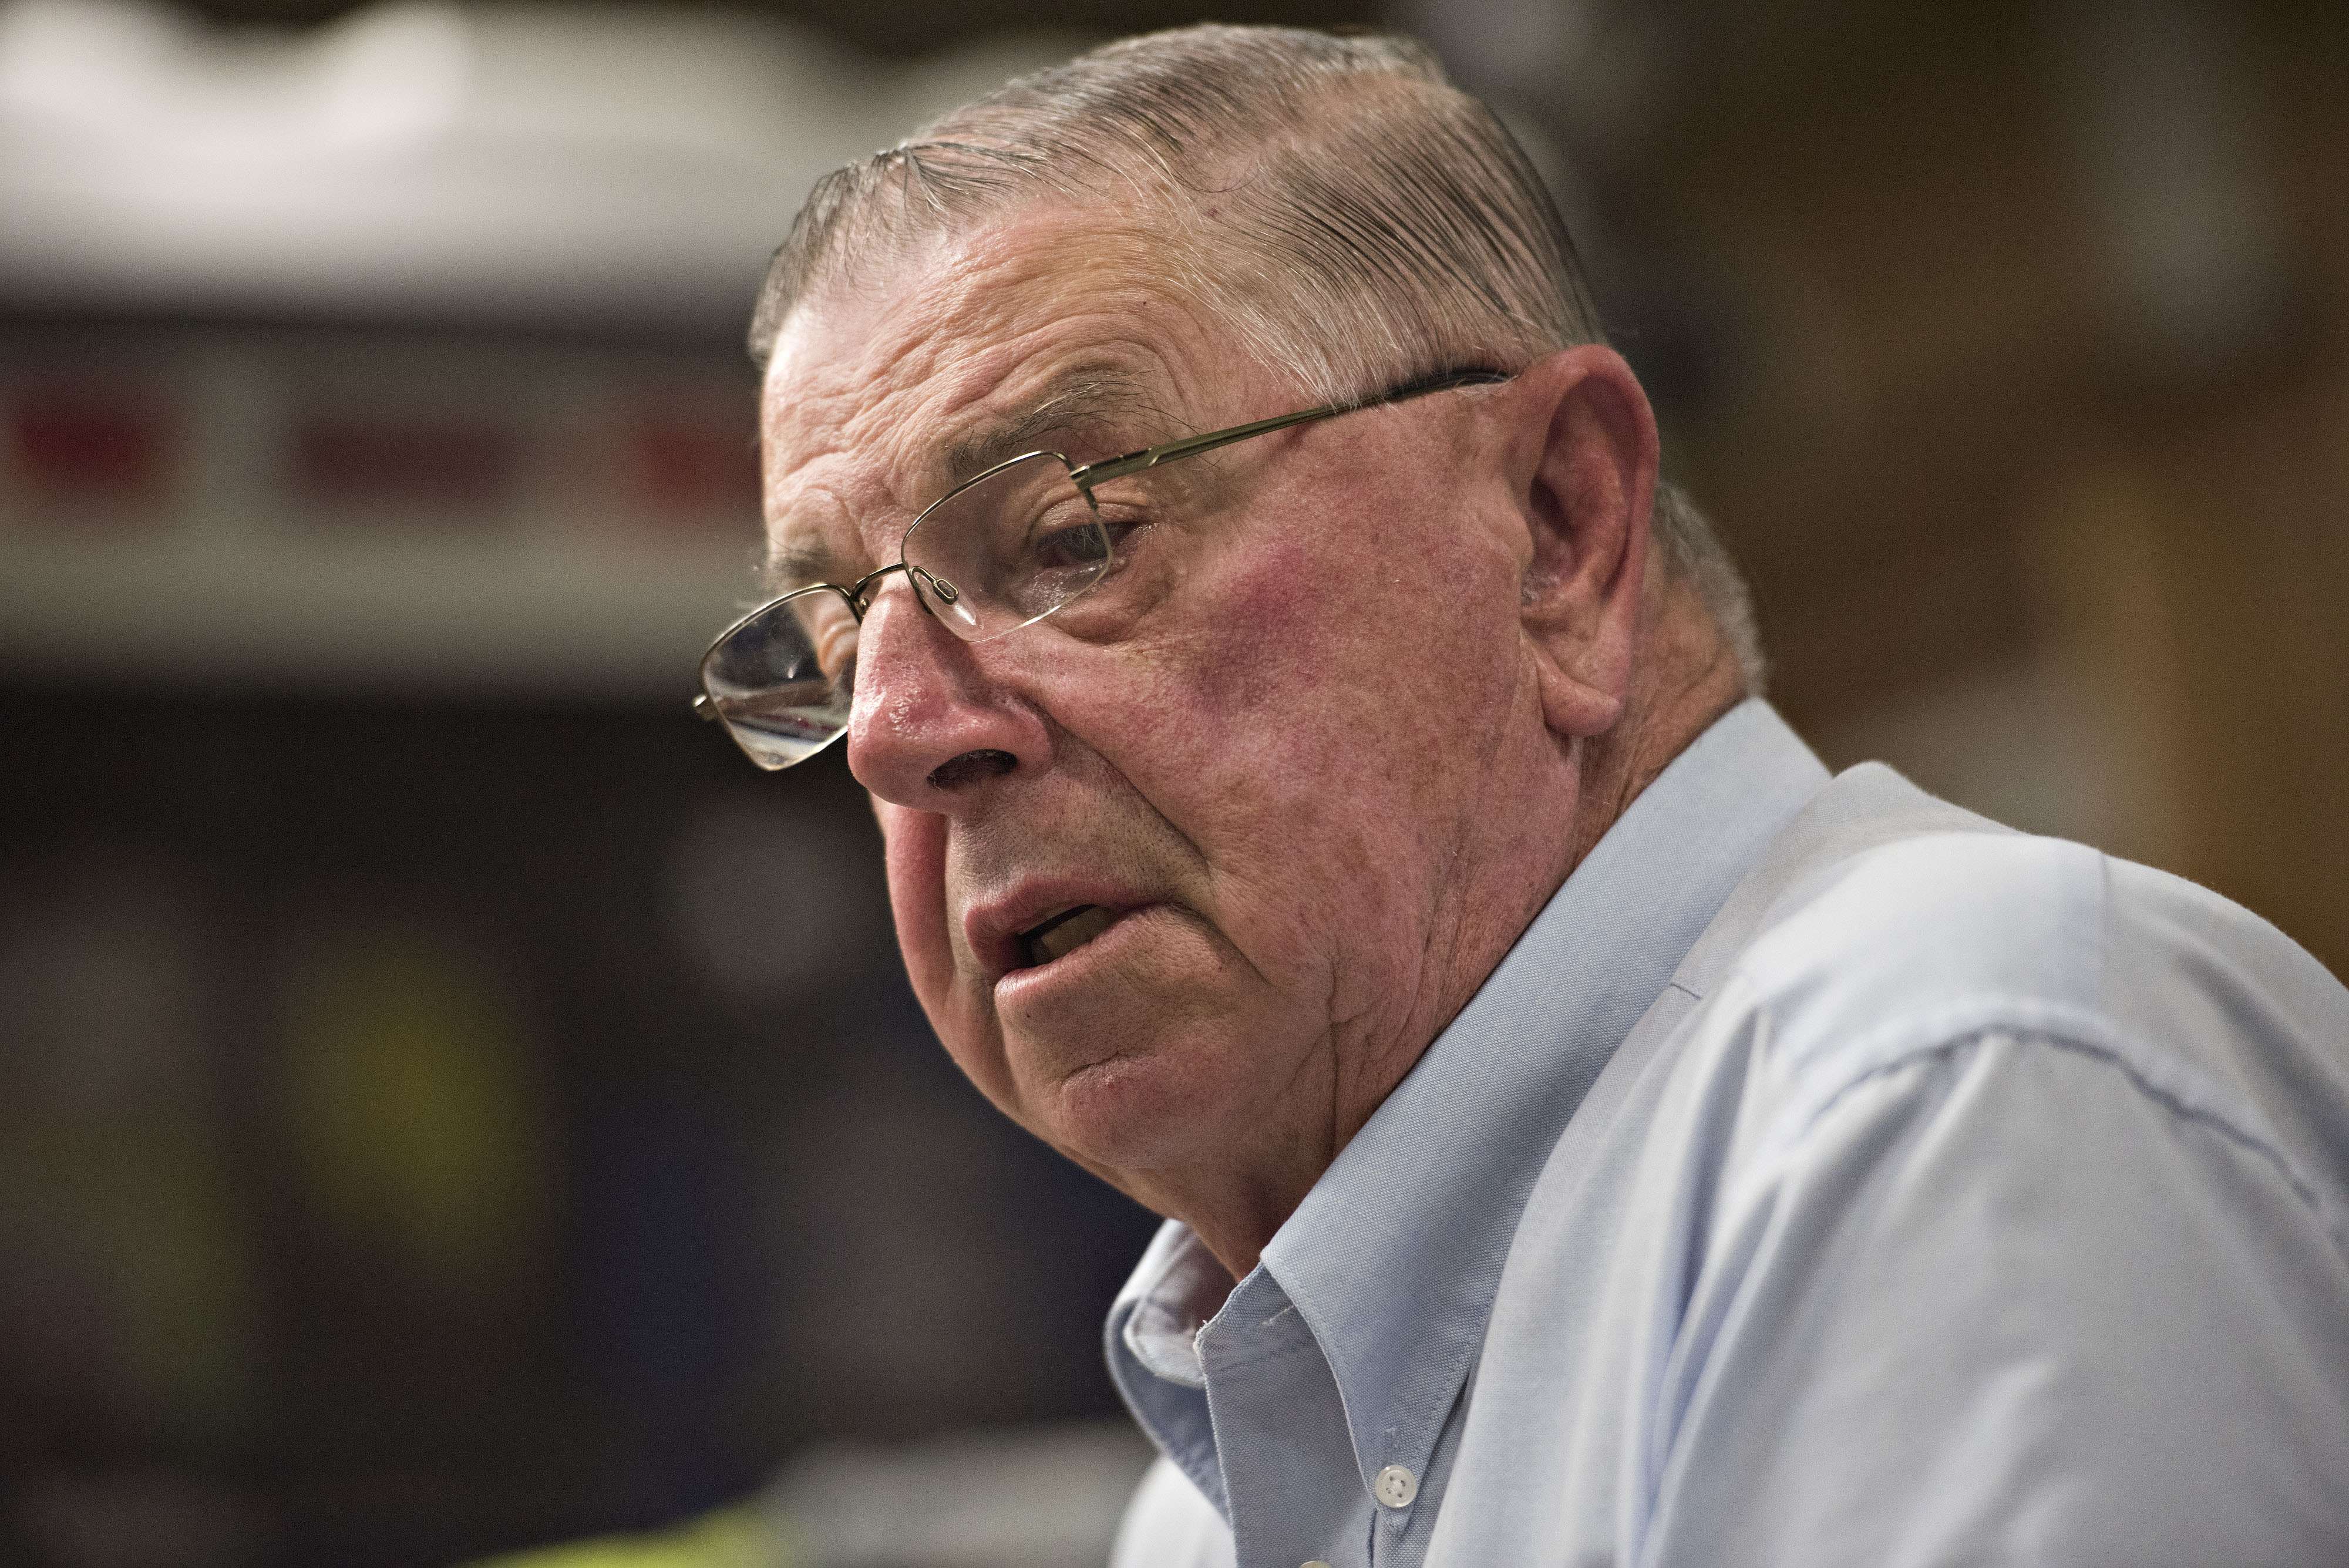 Henry Rayhons, an Iowa state legislator, speaks during an Oct. 8 interview in Garner, Iowa. Rayhons is awaiting trial on a felony charge that he raped his wife, Donna Young, at a nursing home where she was living. (Daniel Acker/Bloomberg News)